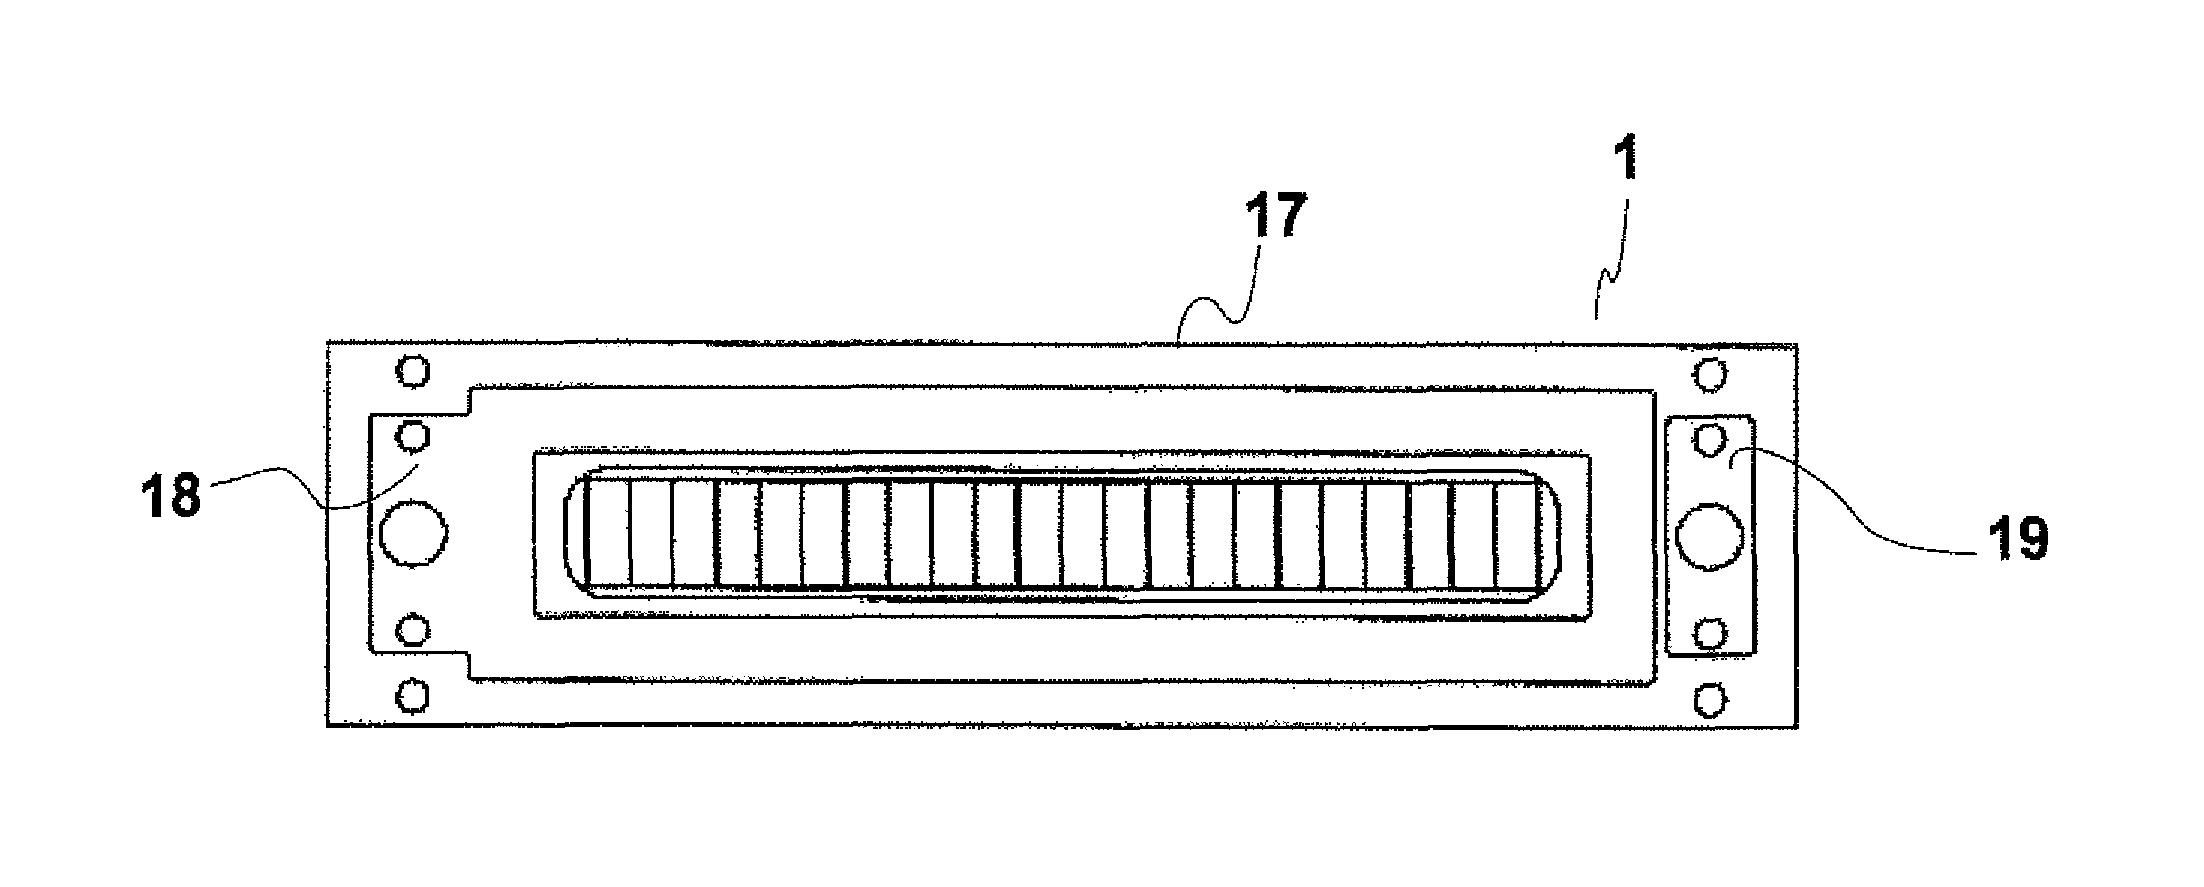 Ribbon microphone unit with symmetrical signal paths